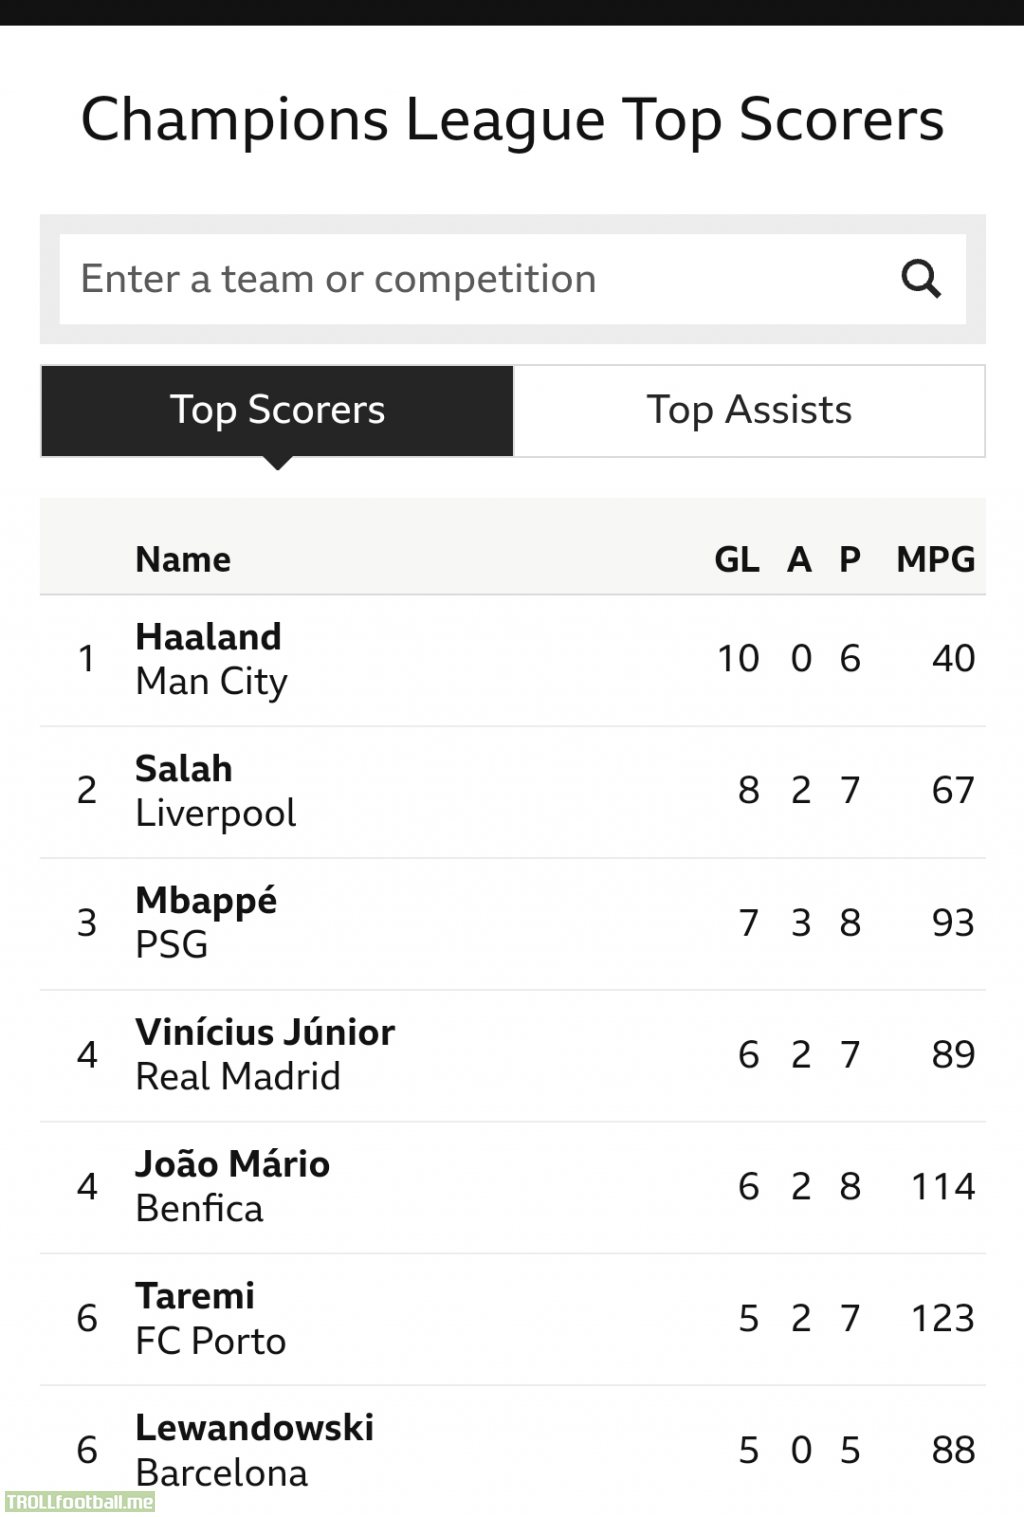 Erling Haaland is the top scorer in the UCL with the least amount of MPG in the top 6. incredible.